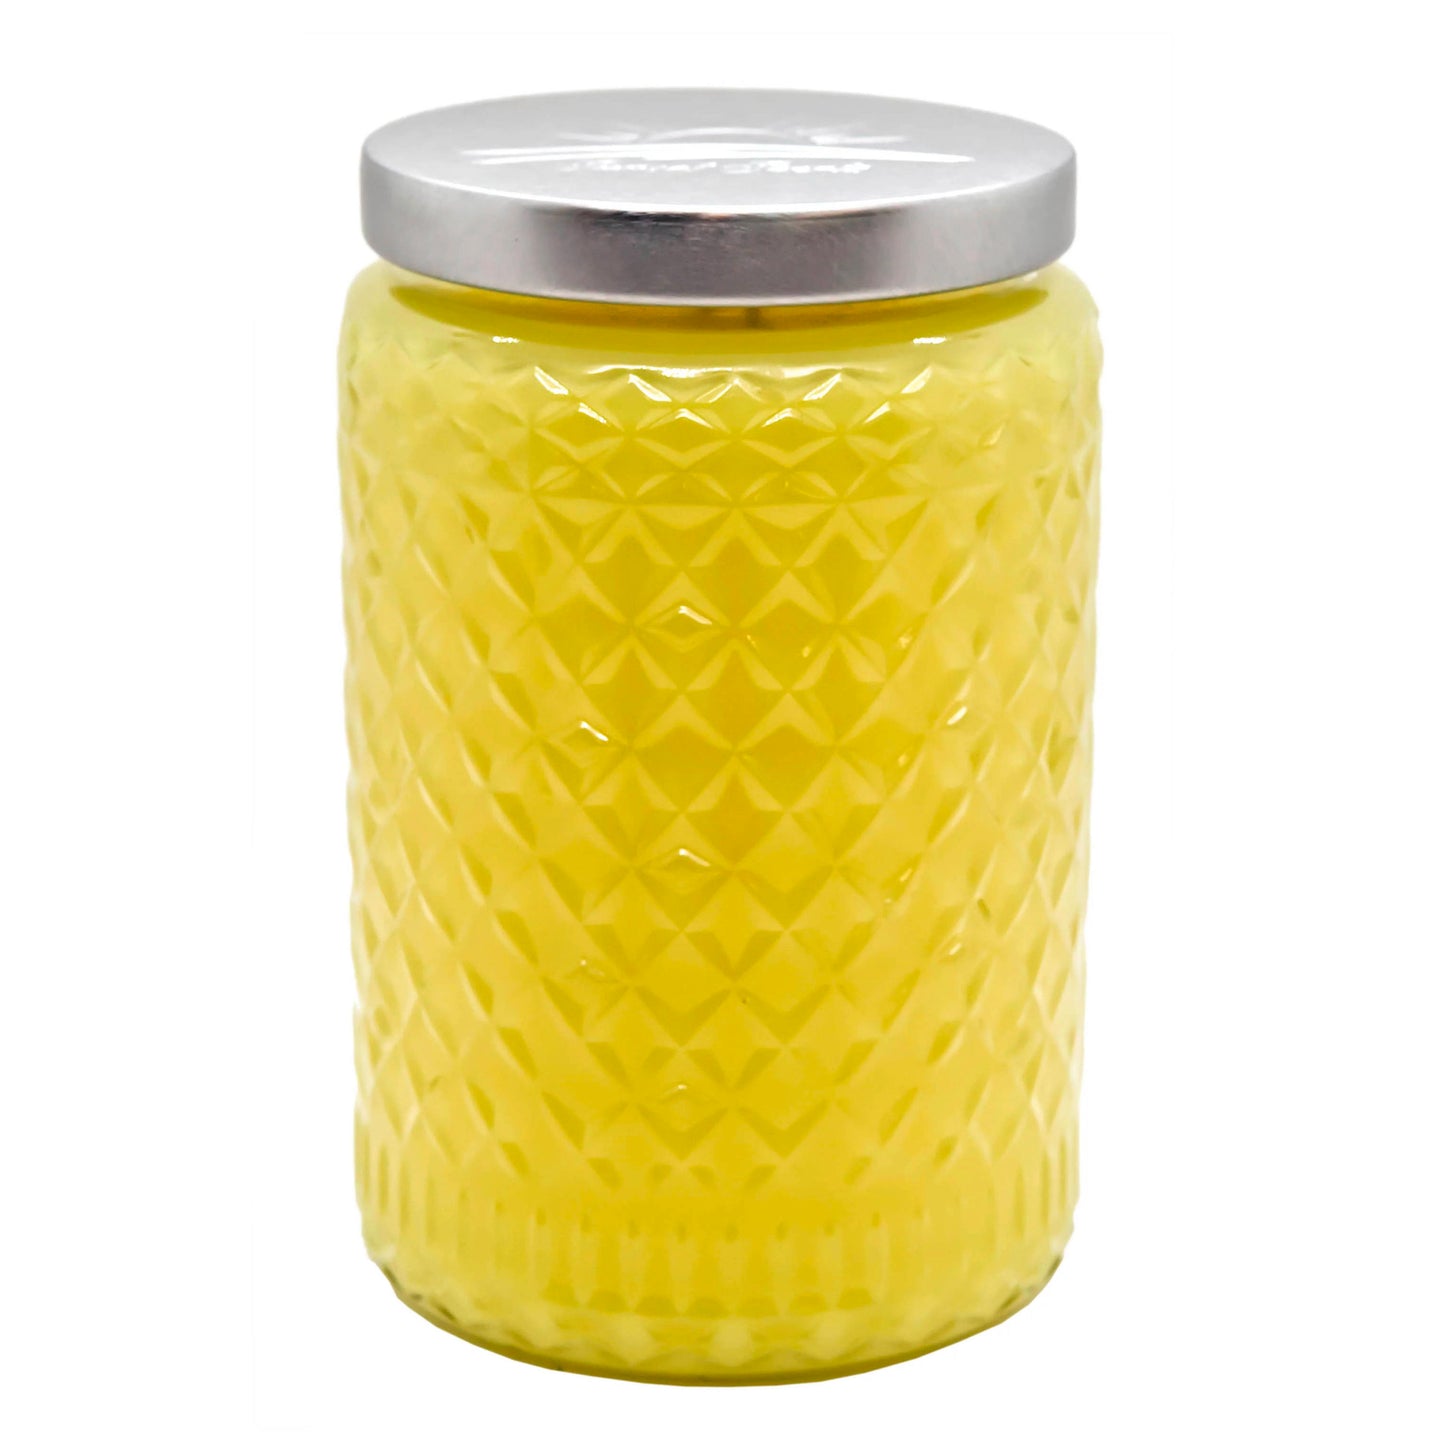 Pineapple Coast Scented Candle large